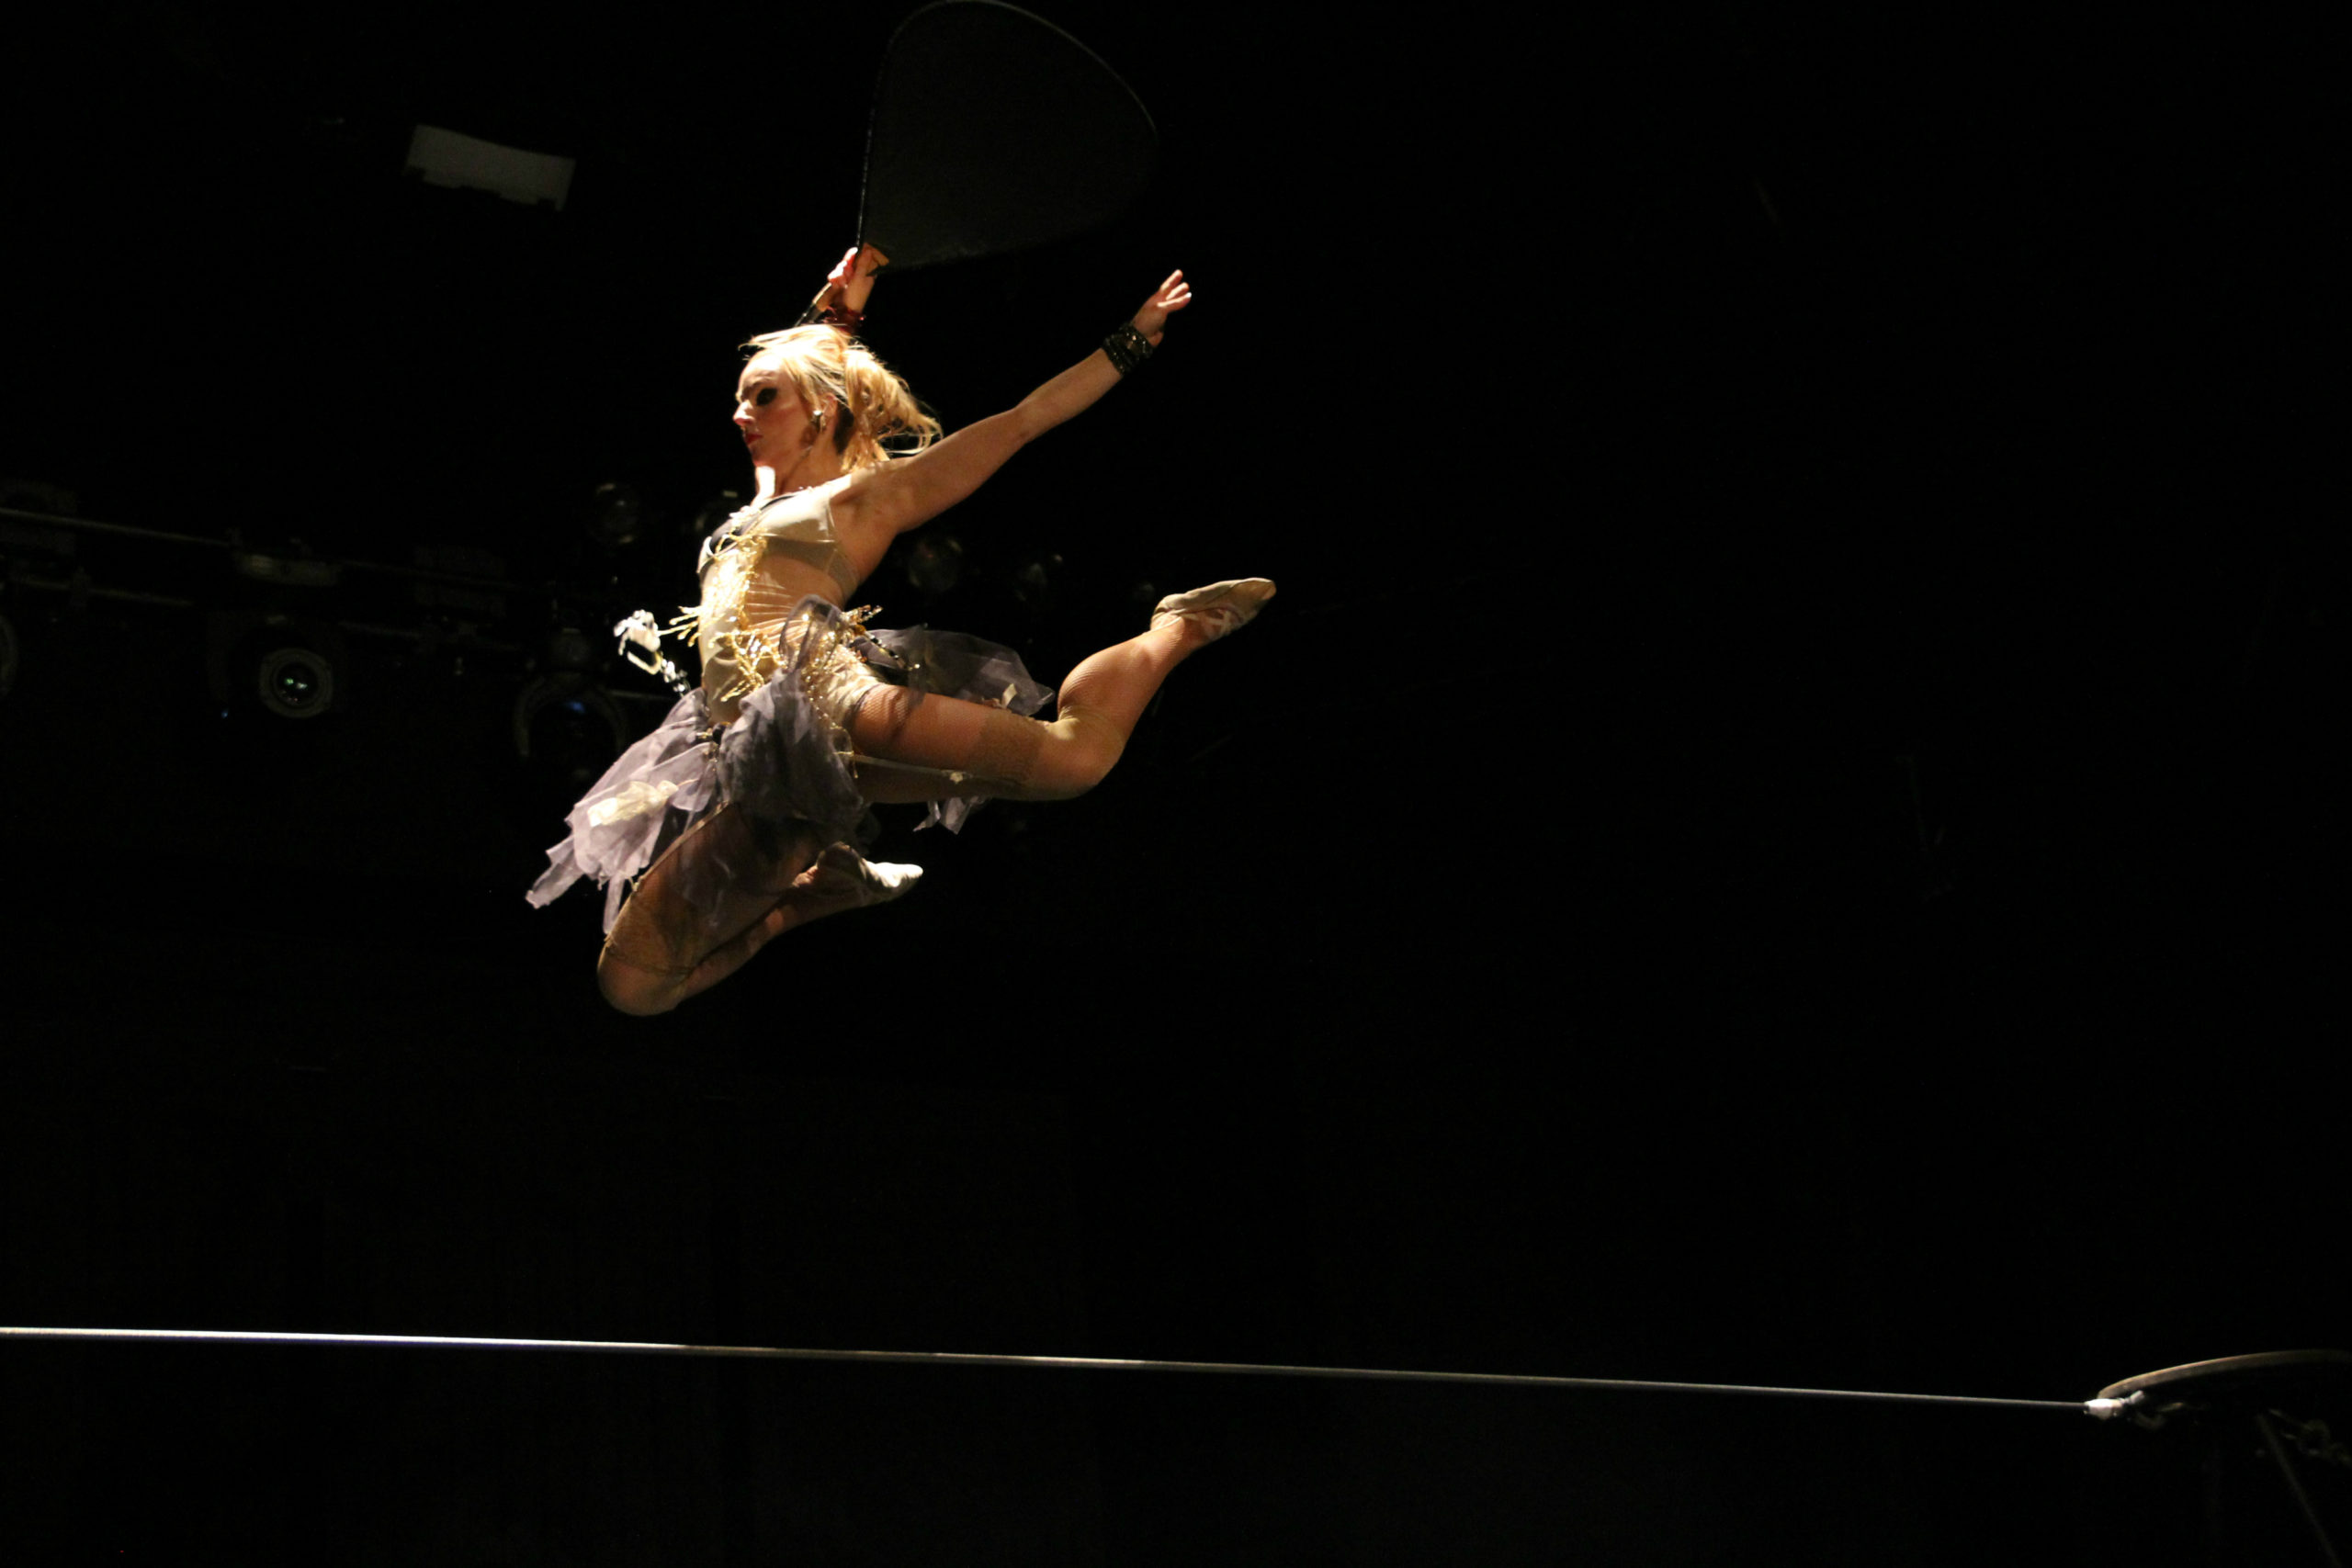 A woman in a skirt performs a dramatic leap on top of the tight wire